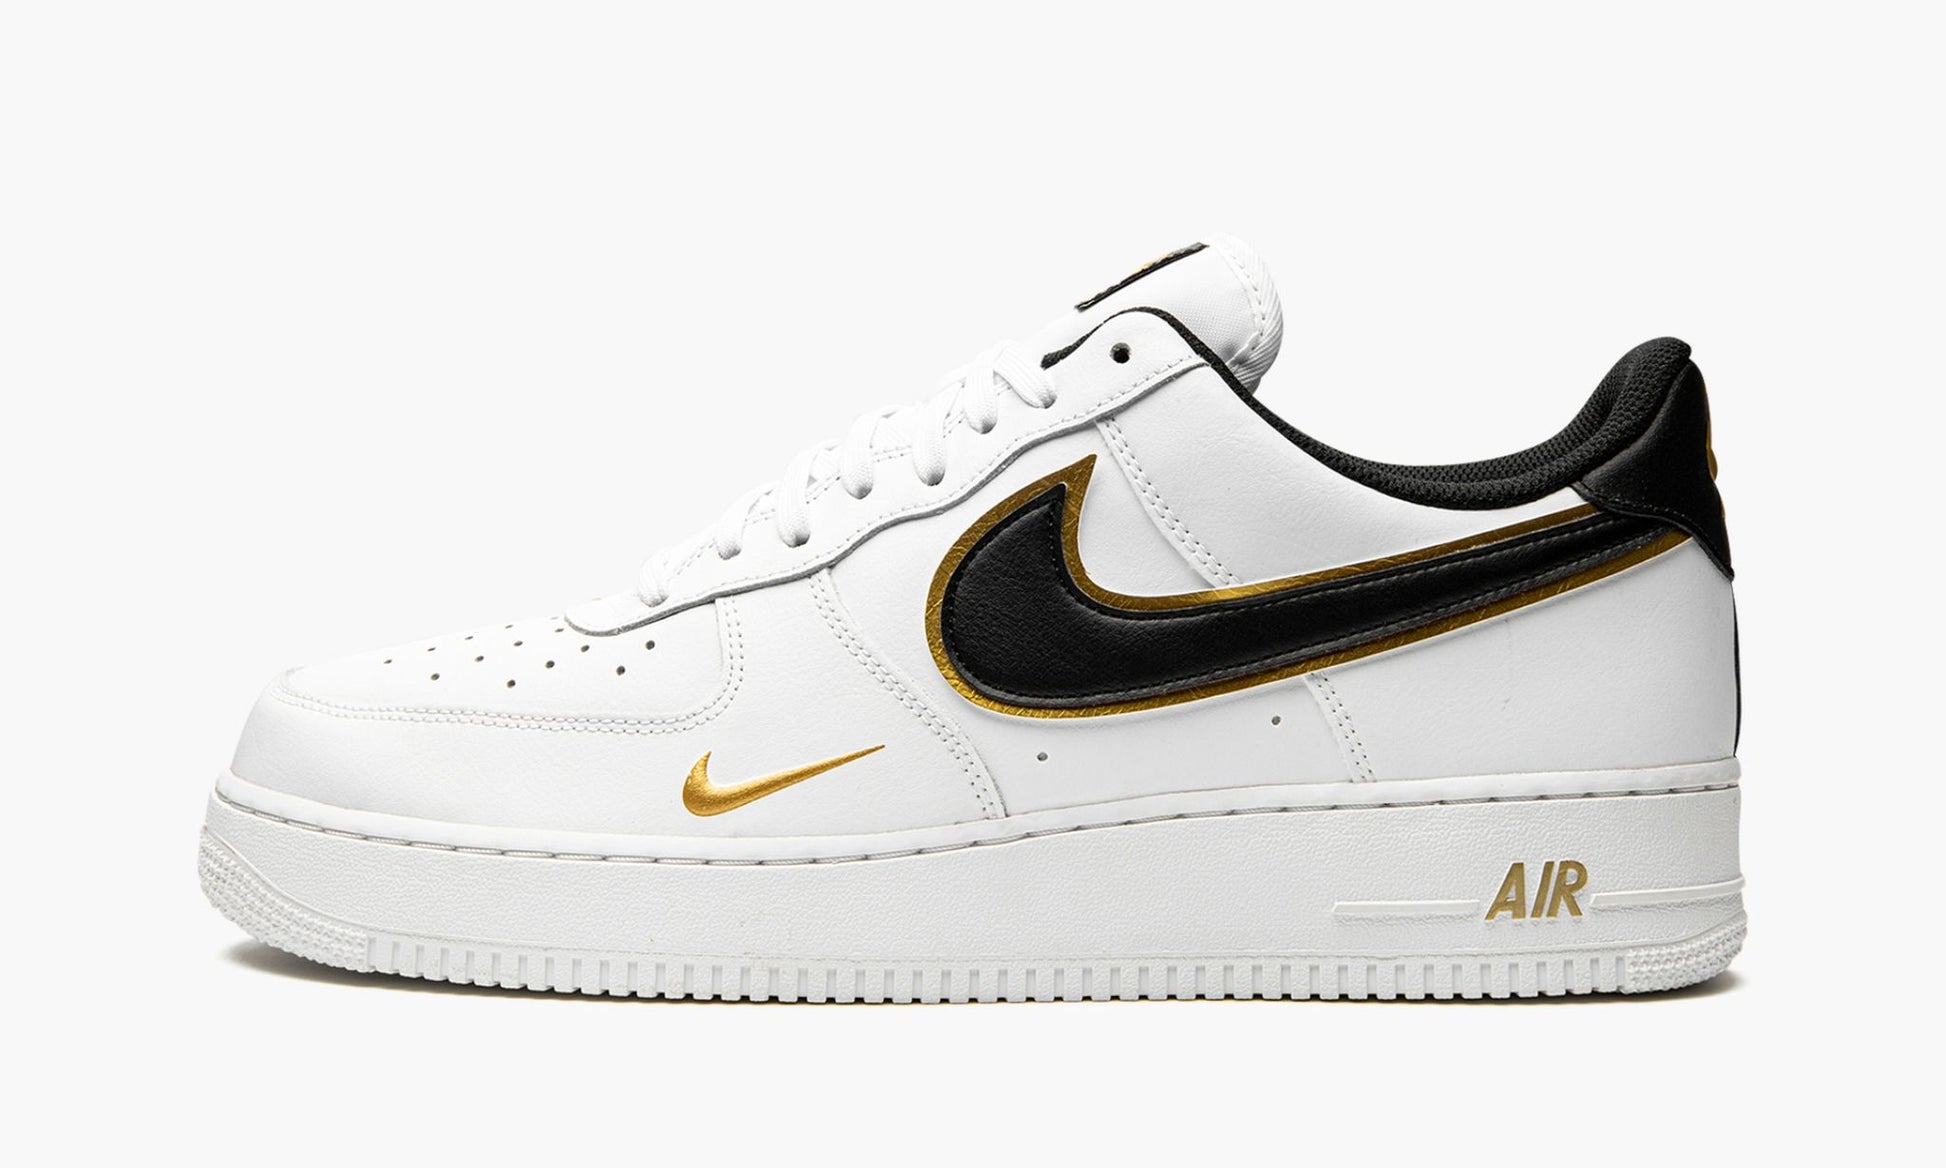 Air Force 1 '07 LV8 "Double Swoosh - White / Black / Gold"